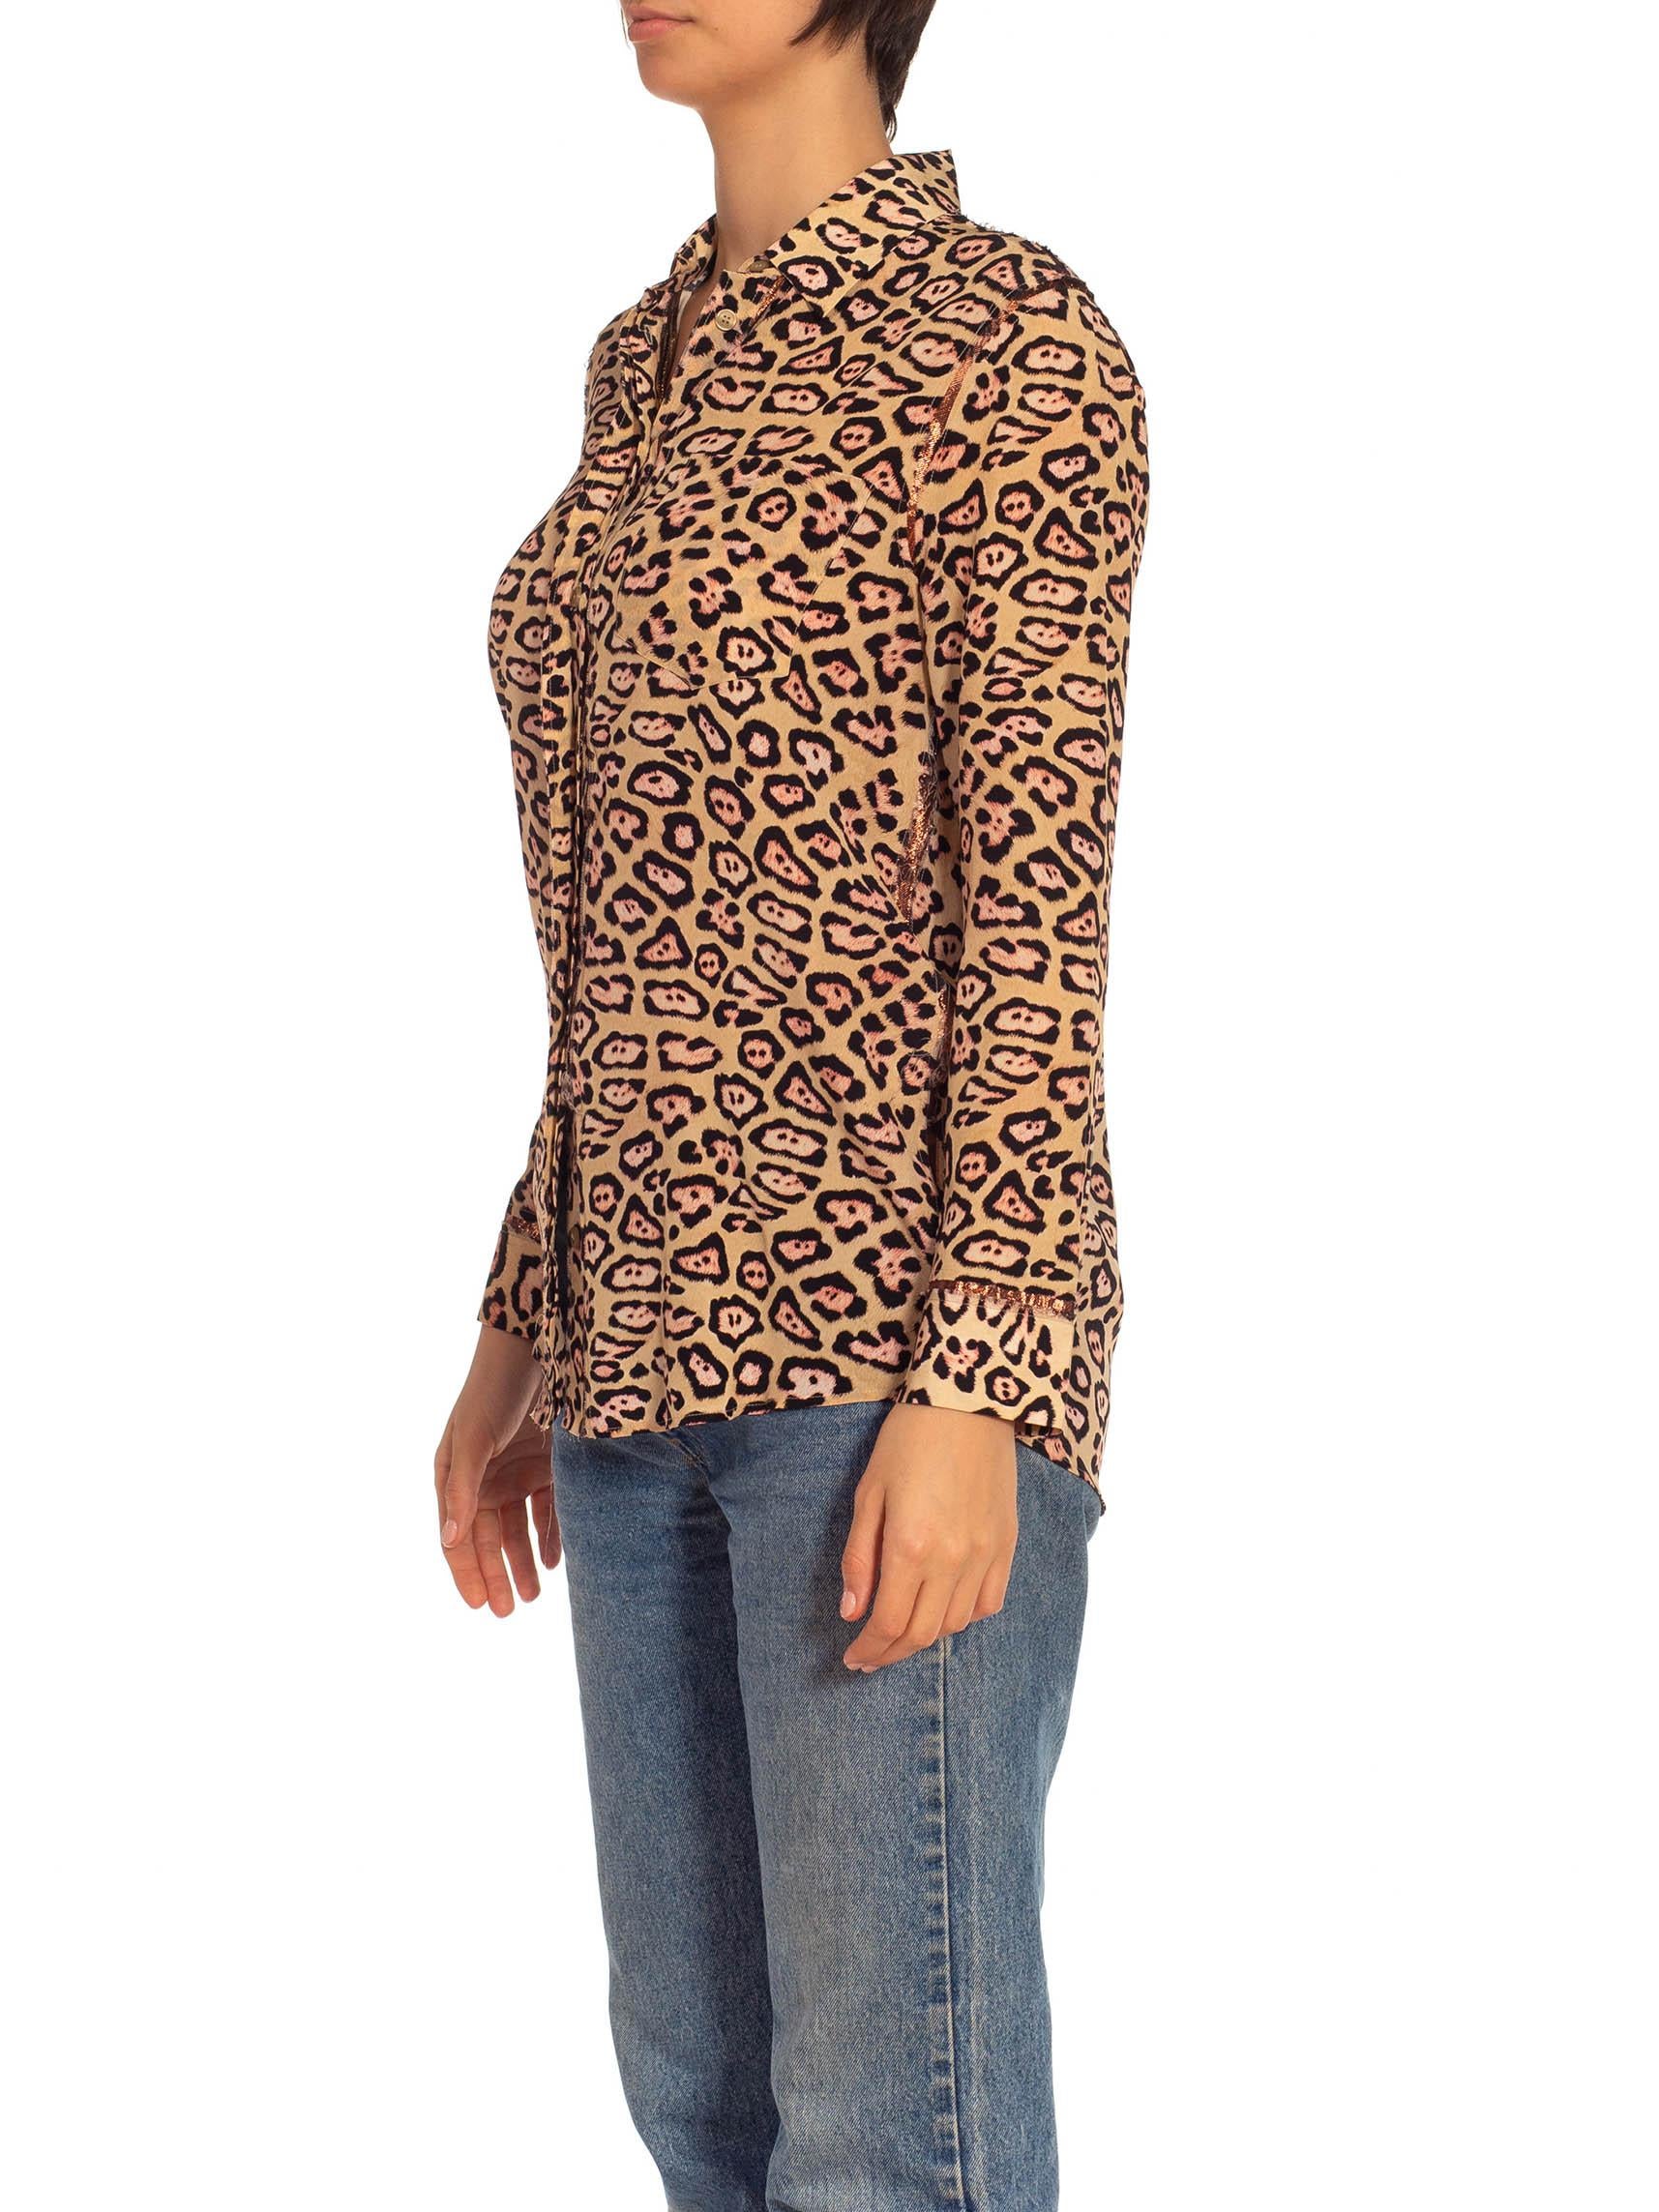 2010S GIVENCHY Leopard Print Tan & Brown Silk With Metallic Trimmings Shirt For Sale 4